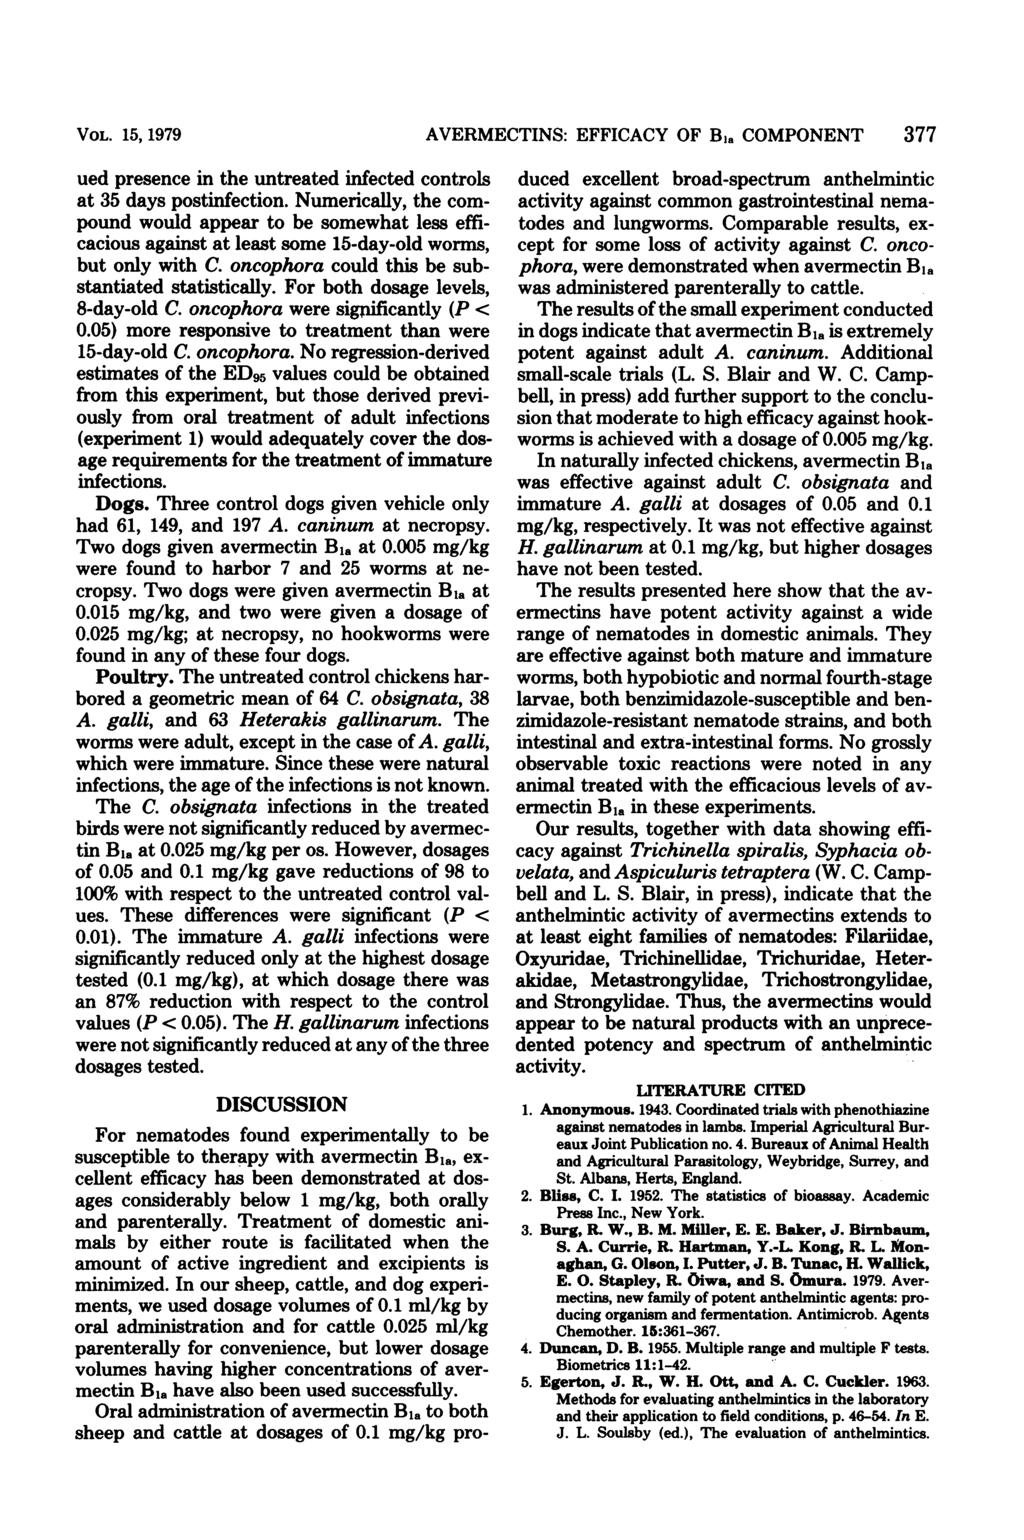 VOL. 15, 1979 ued presence in the untreated infected controls at 35 days postinfection.